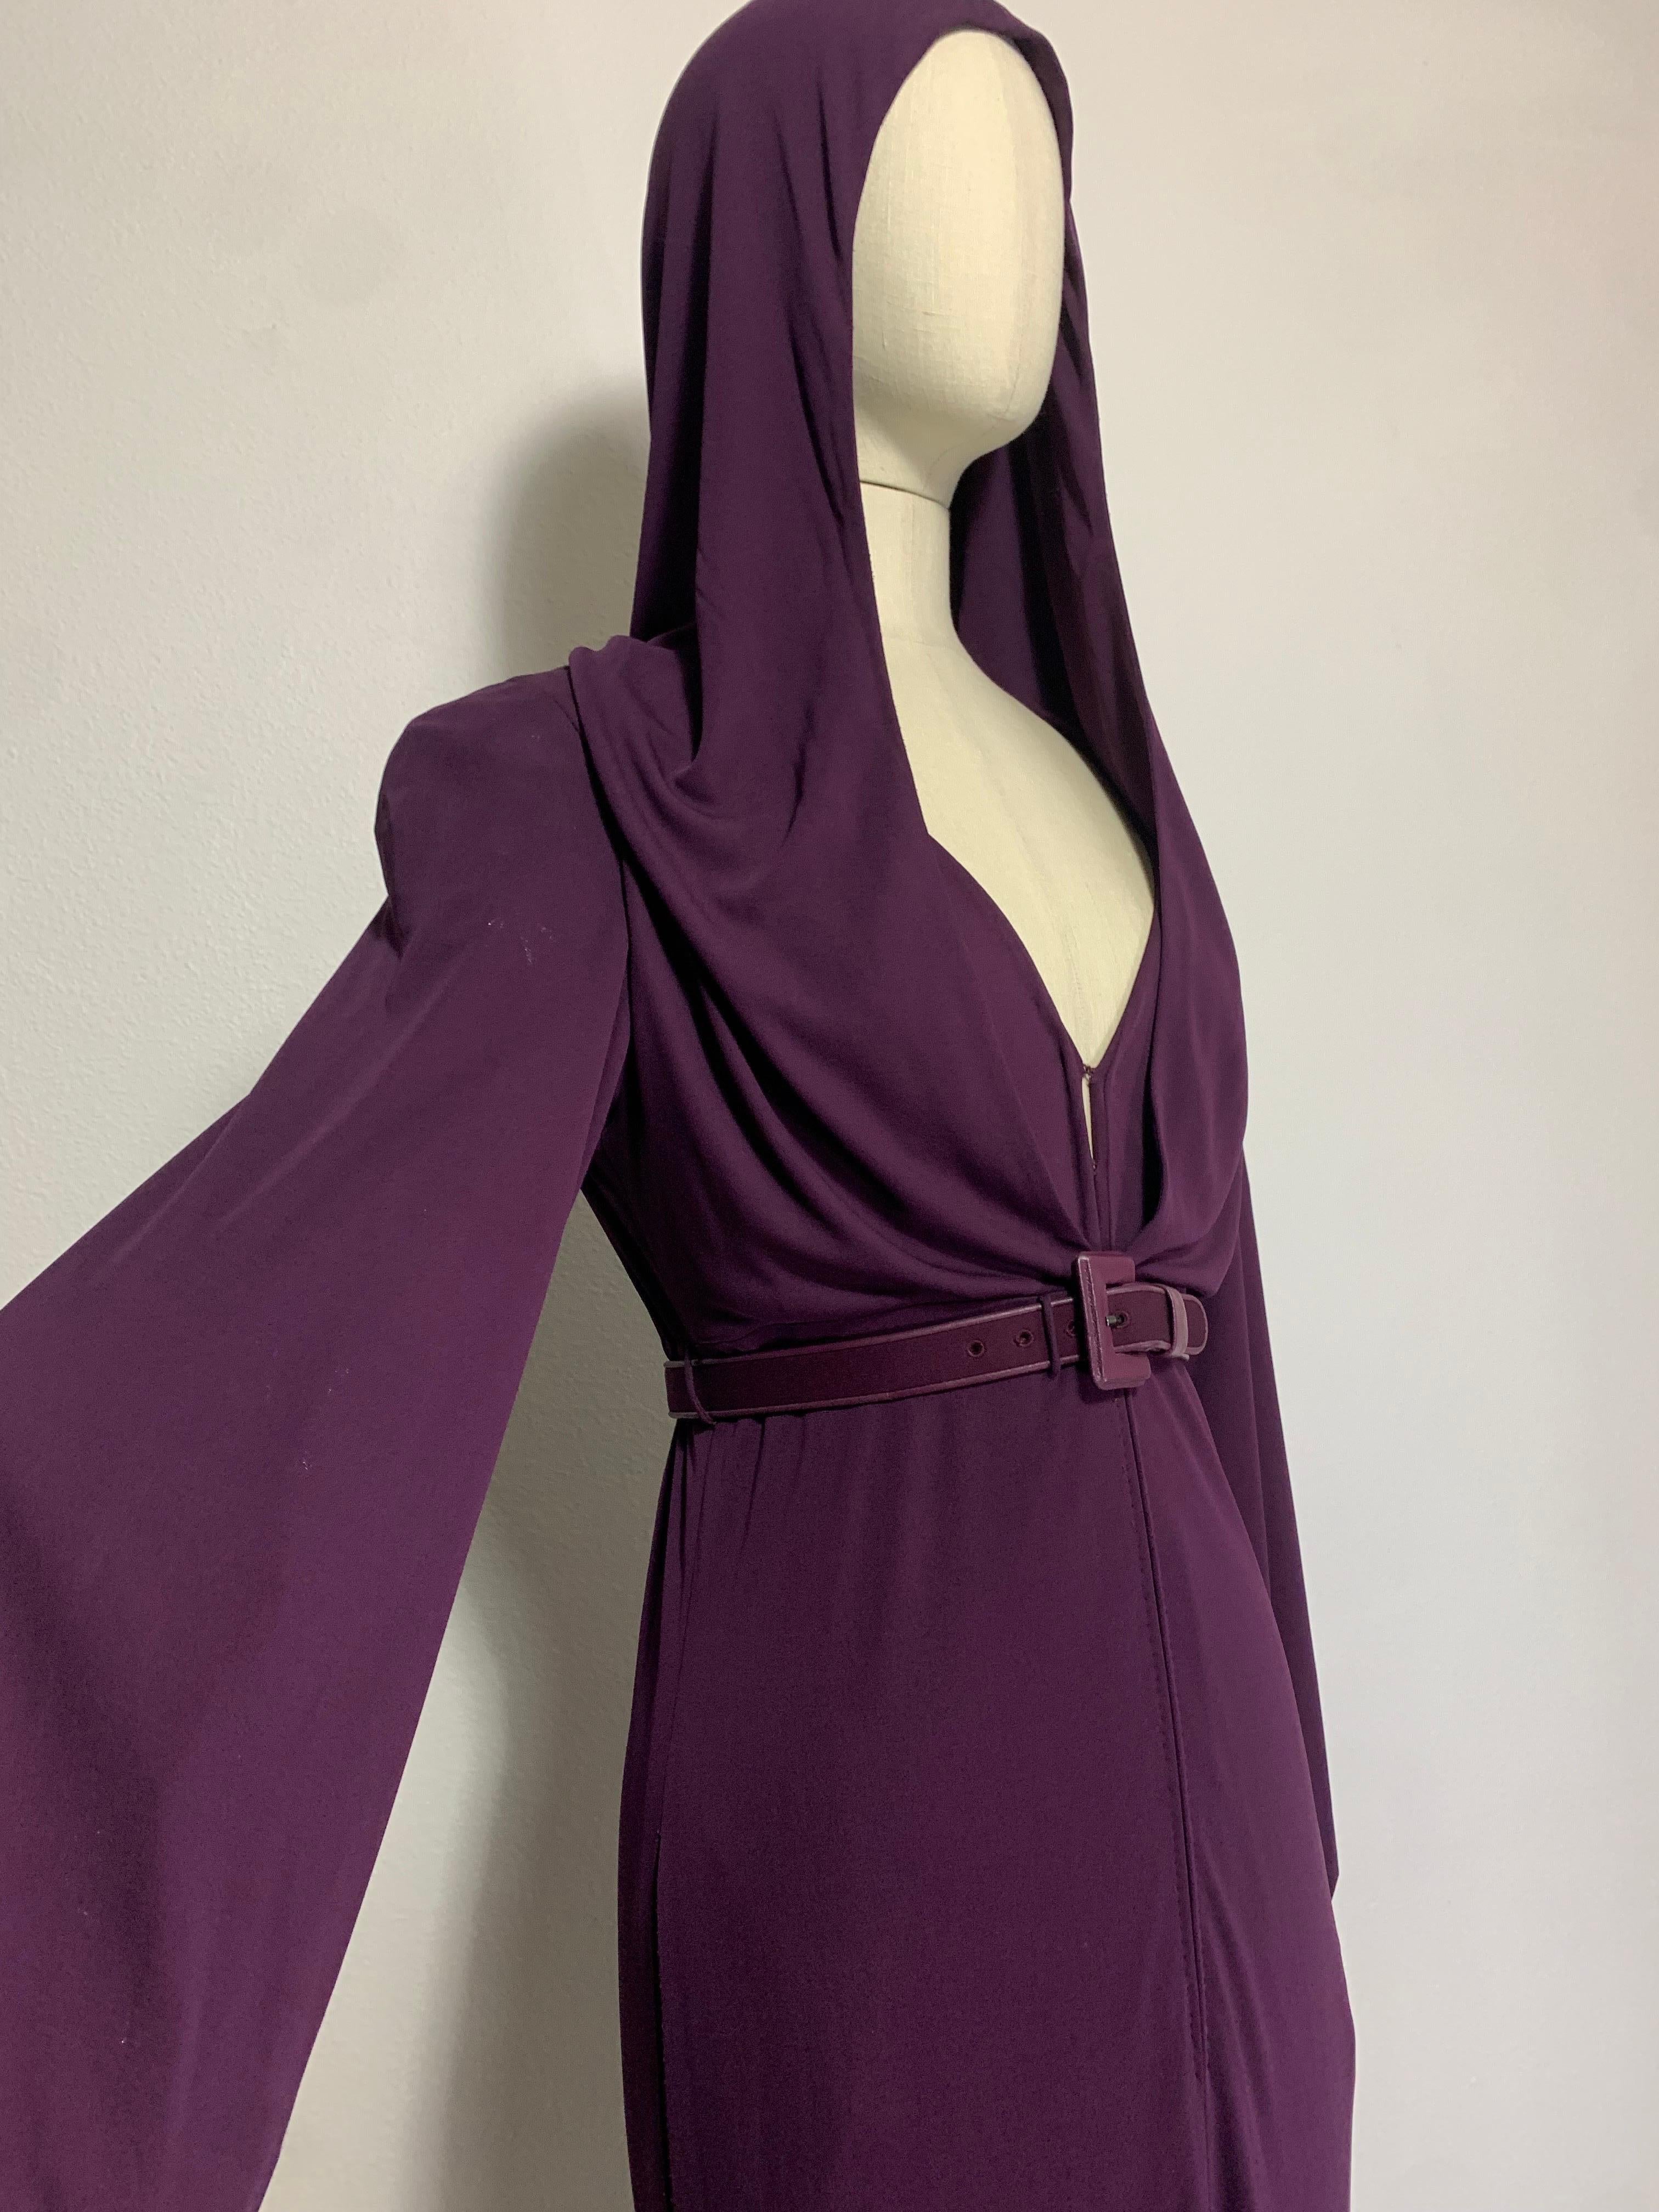 1975 James Galanos Dramatic Aubergine Jersey Maxi Gown w Fabulous Draped Hood For Sale 7